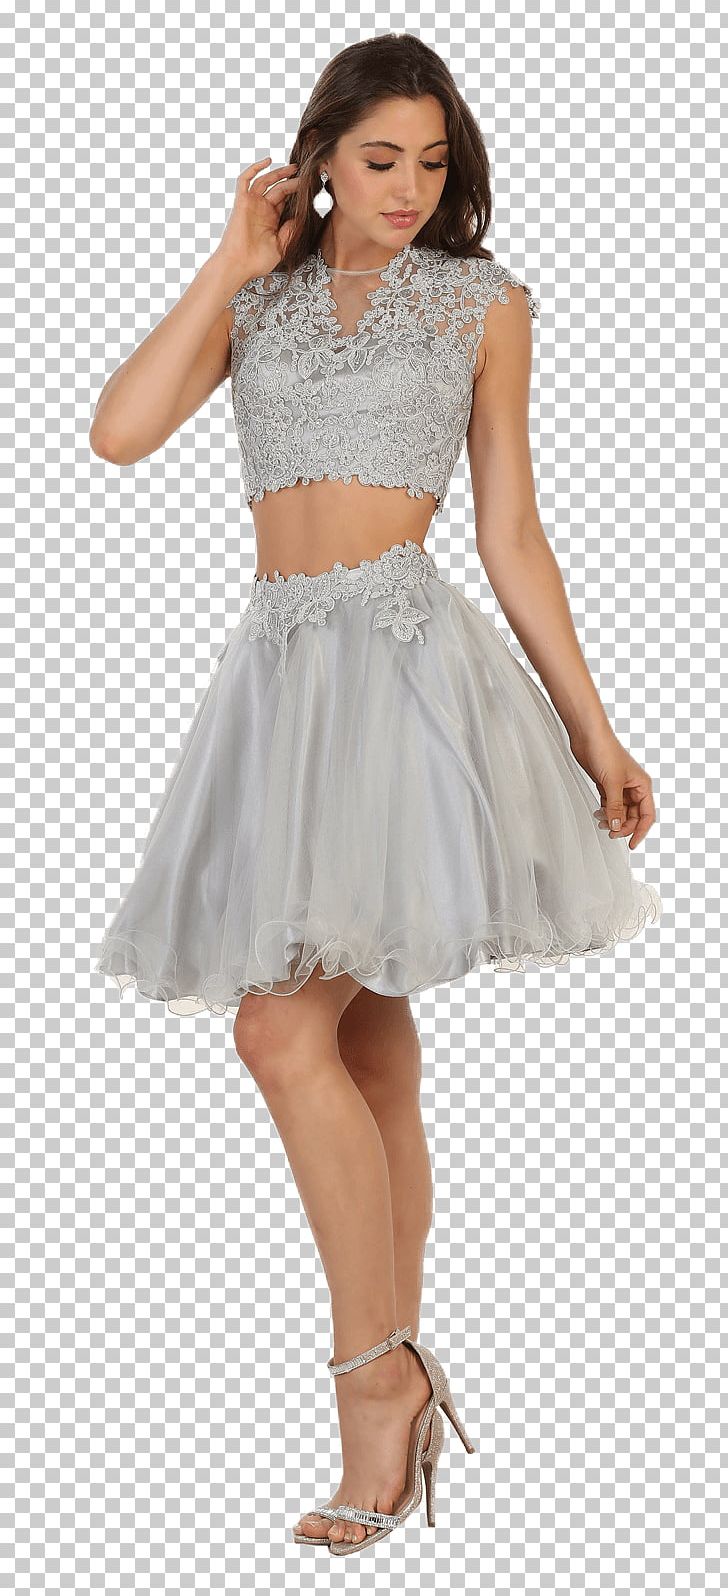 Cocktail Dress Sleeve Formal Wear Prom PNG, Clipart, Ball Gown, Bridal Party Dress, Clothing, Clothing Sizes, Cocktail Dress Free PNG Download